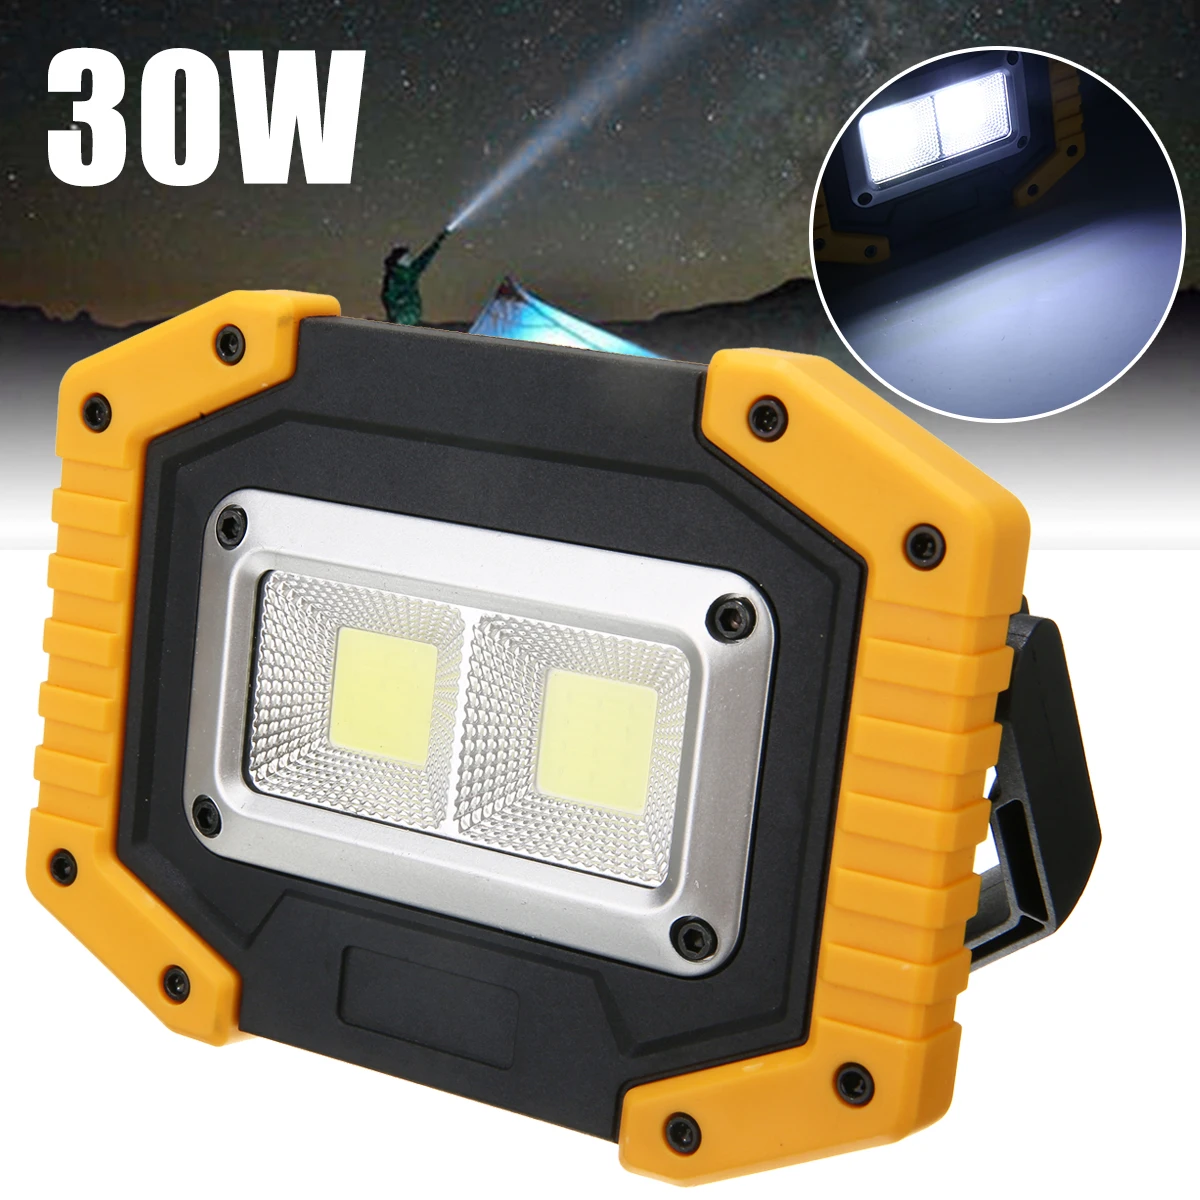 

1pcs Portable 2 COB 30W 800LM IP65 LED Flood Light Spot Lamp Rechargeable Outdoor Camping Spotlights